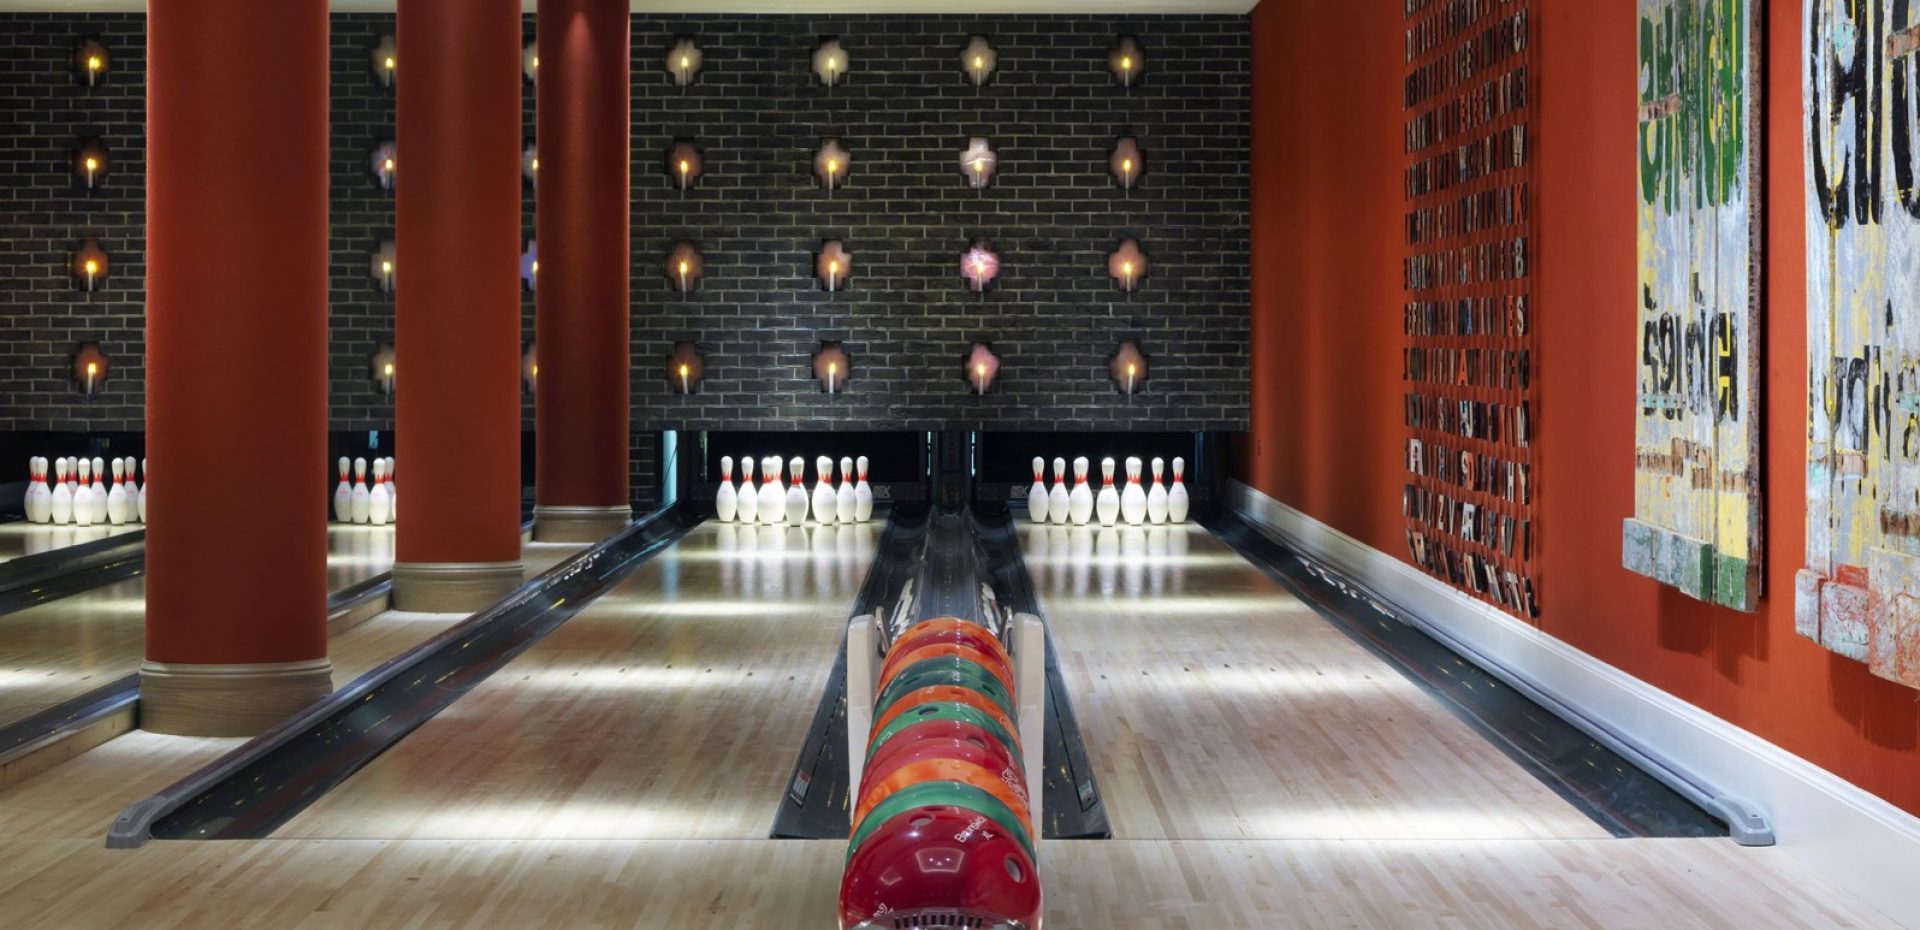 Bowling-alley